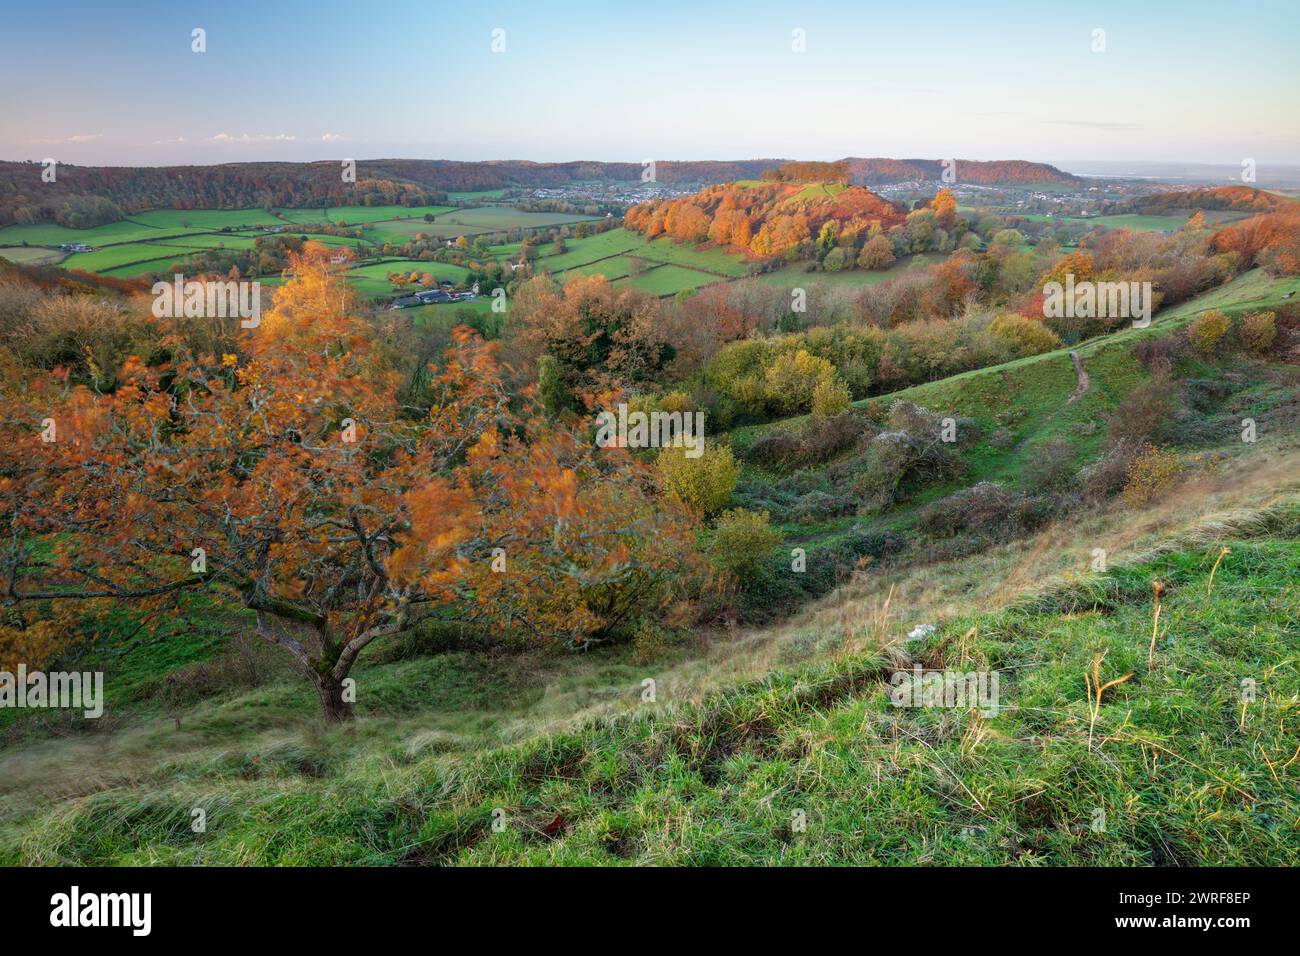 View to Dursley and Downham Hill from Uley Bury Hillfort at sunrise in autumn, Dursley, Cotswolds, Gloucestershire, England, United Kingdom, Europe Stock Photo